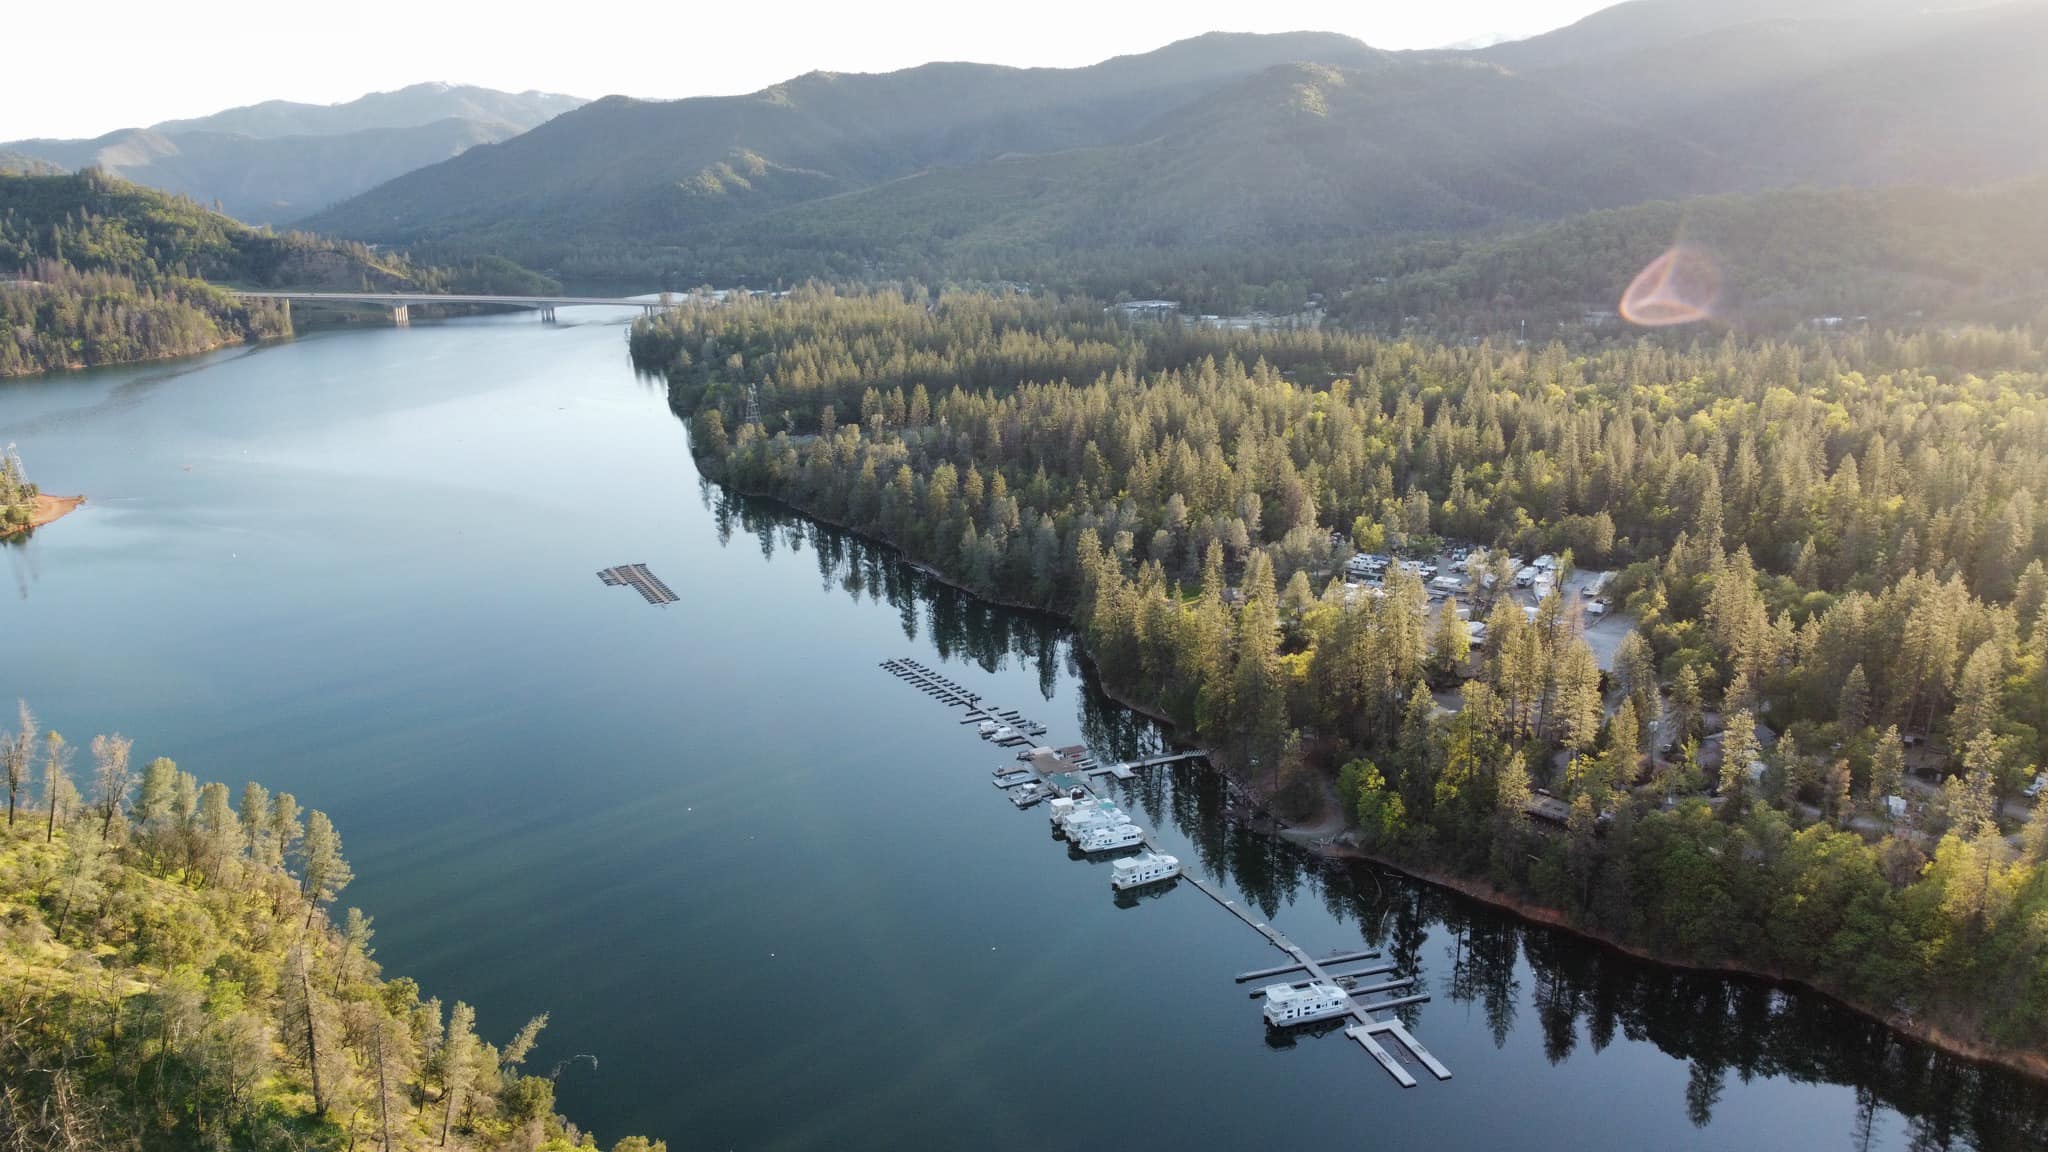 drone image of Antlers Resort and Marina shows the large body of water filled with boats of various sizes, from small rowboats to large houseboats. There are several banks along the lakes edges where people can dock their boats or sunbathe. The sky above is clear and blue. The large mountains provide a contrast against the lush green trees that line their base.